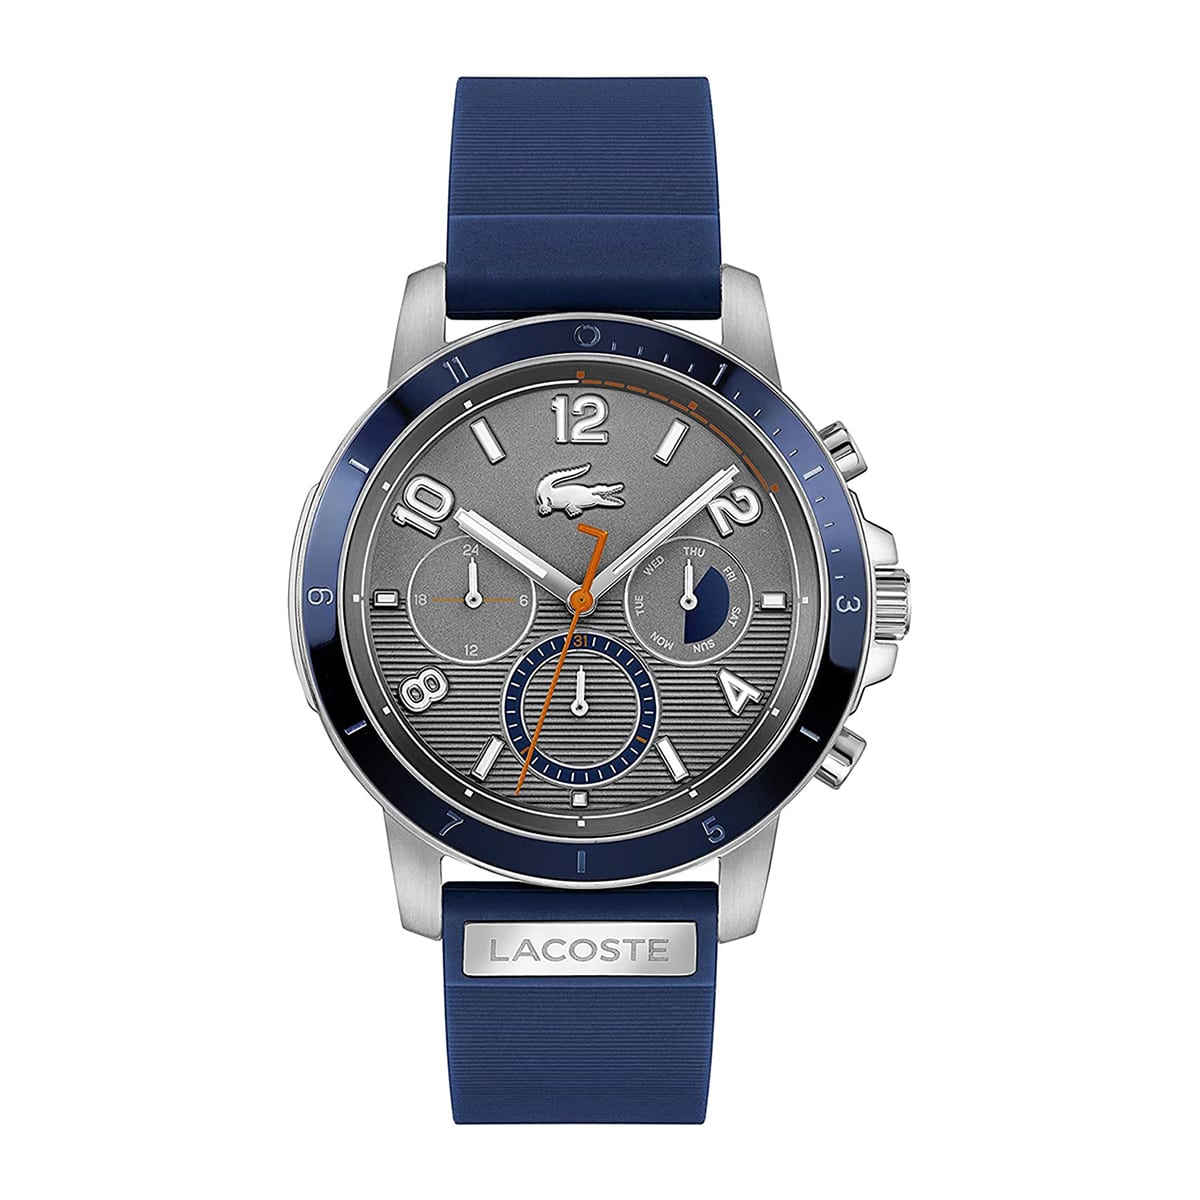 MONTRE LACOSTE TOPSPIN HOMME M.FONCTION SILICONE